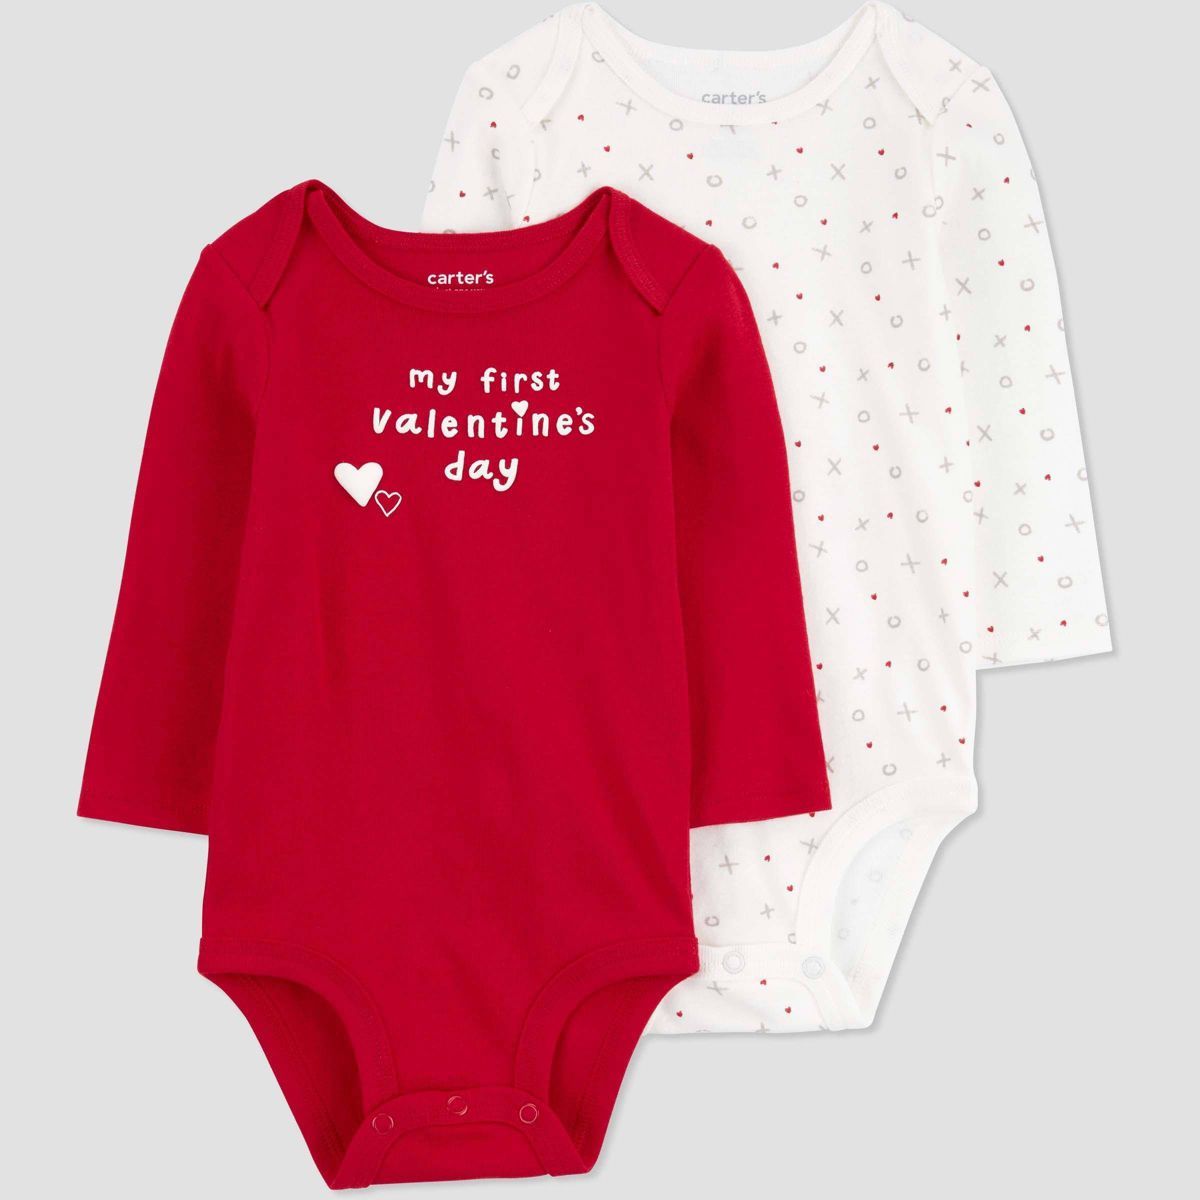 Carter's Just One You® Baby 2pk My First Valentine's Day Bodysuit - Red | Target